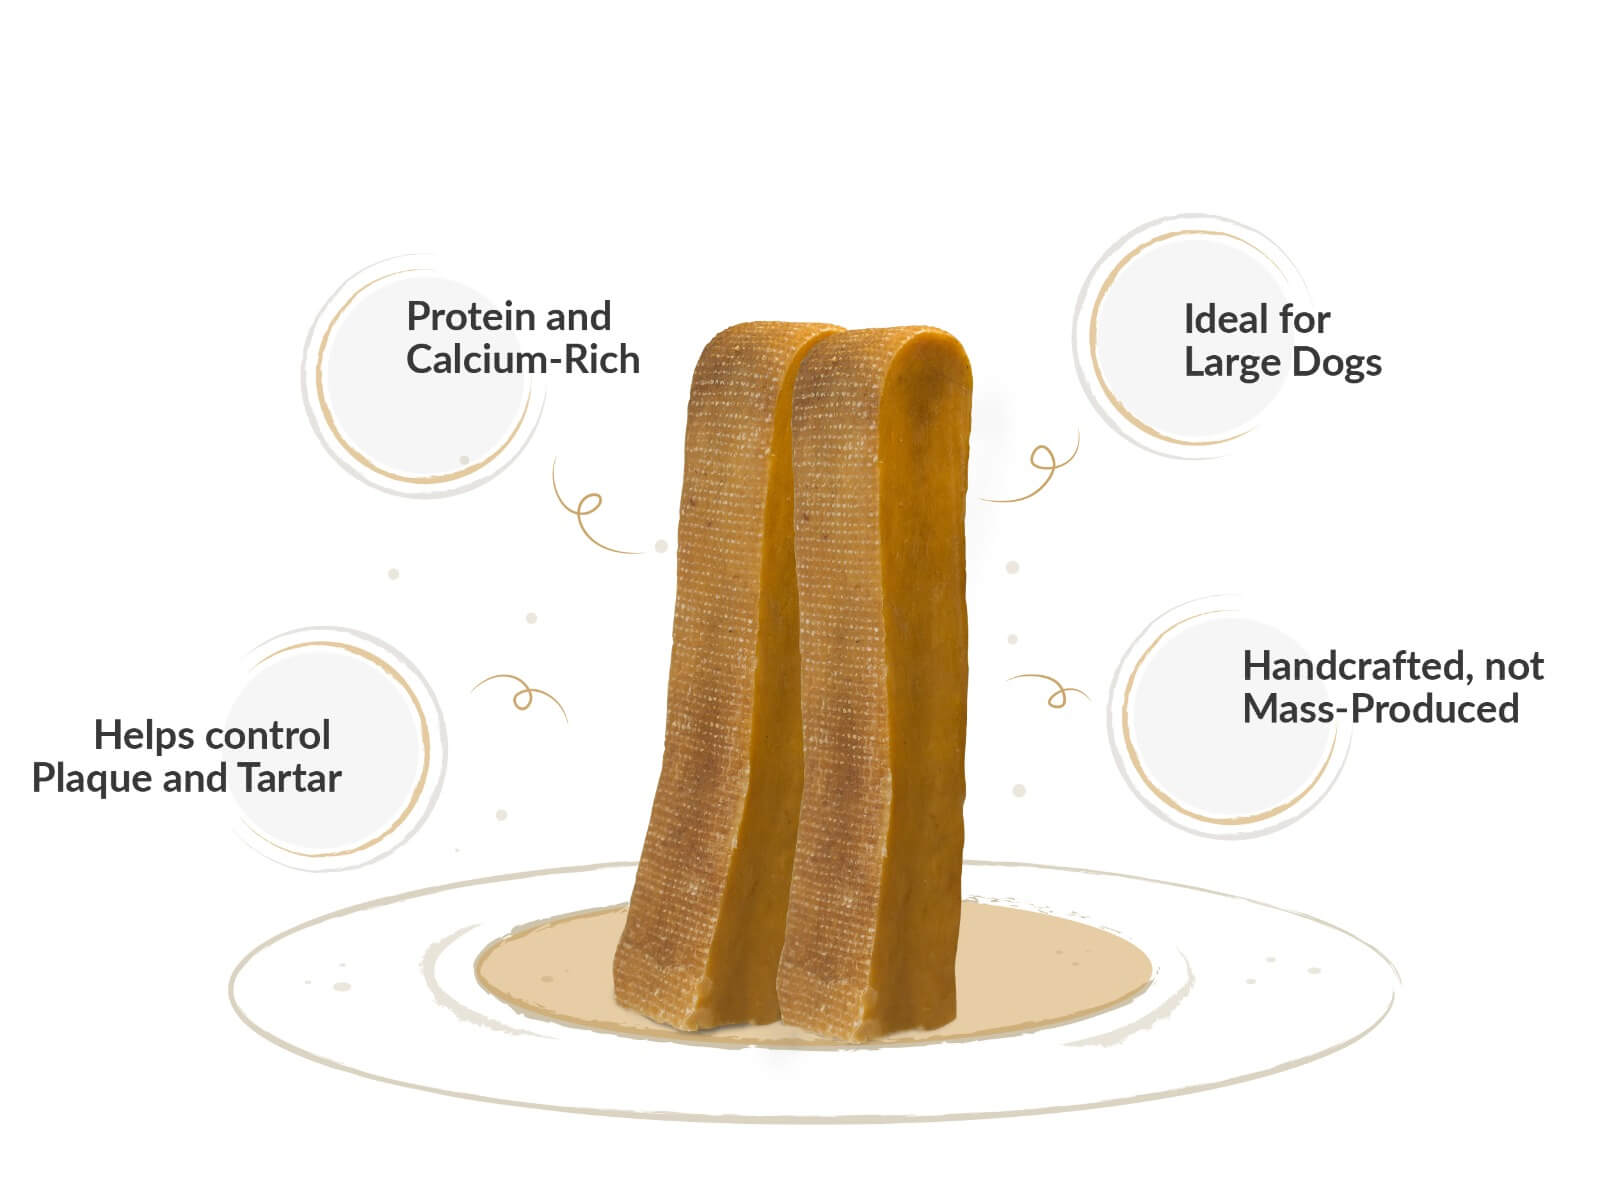 Key Benefits of Large Bars for dogs